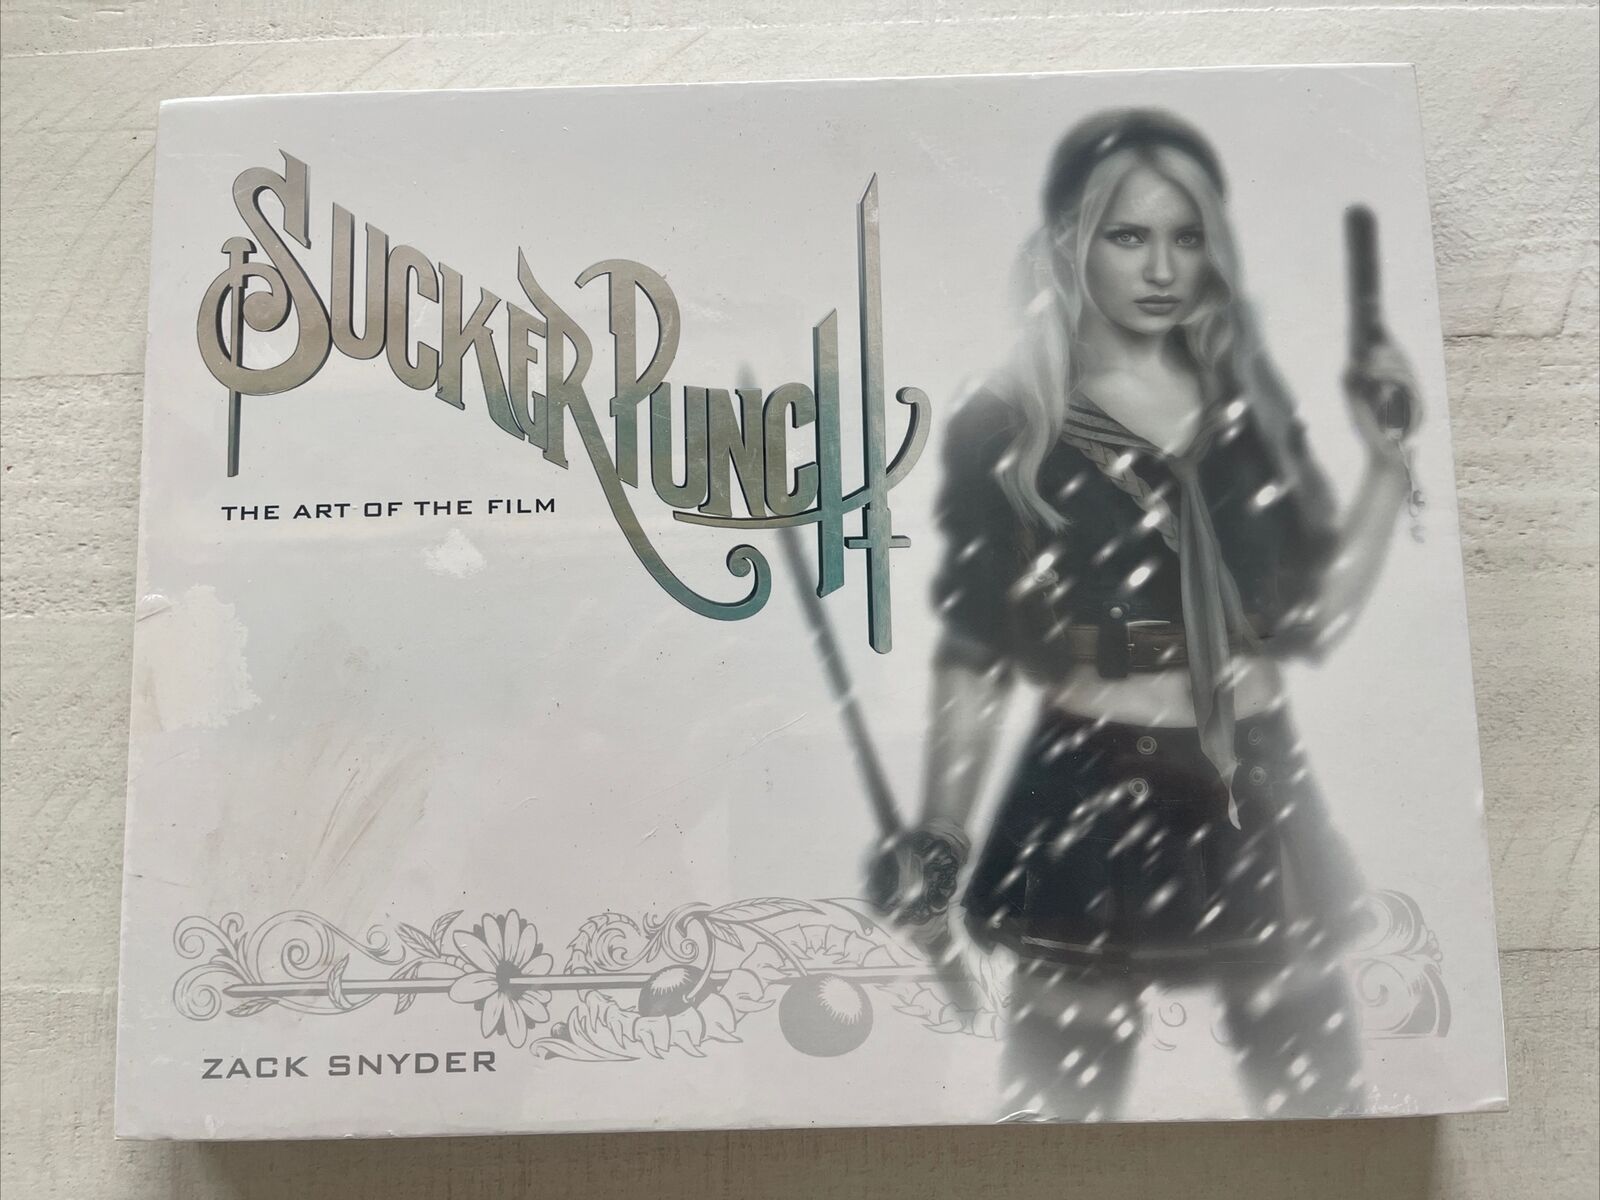 sucker punch: The Art Of The Film Limited Numbered Autographed First Edition